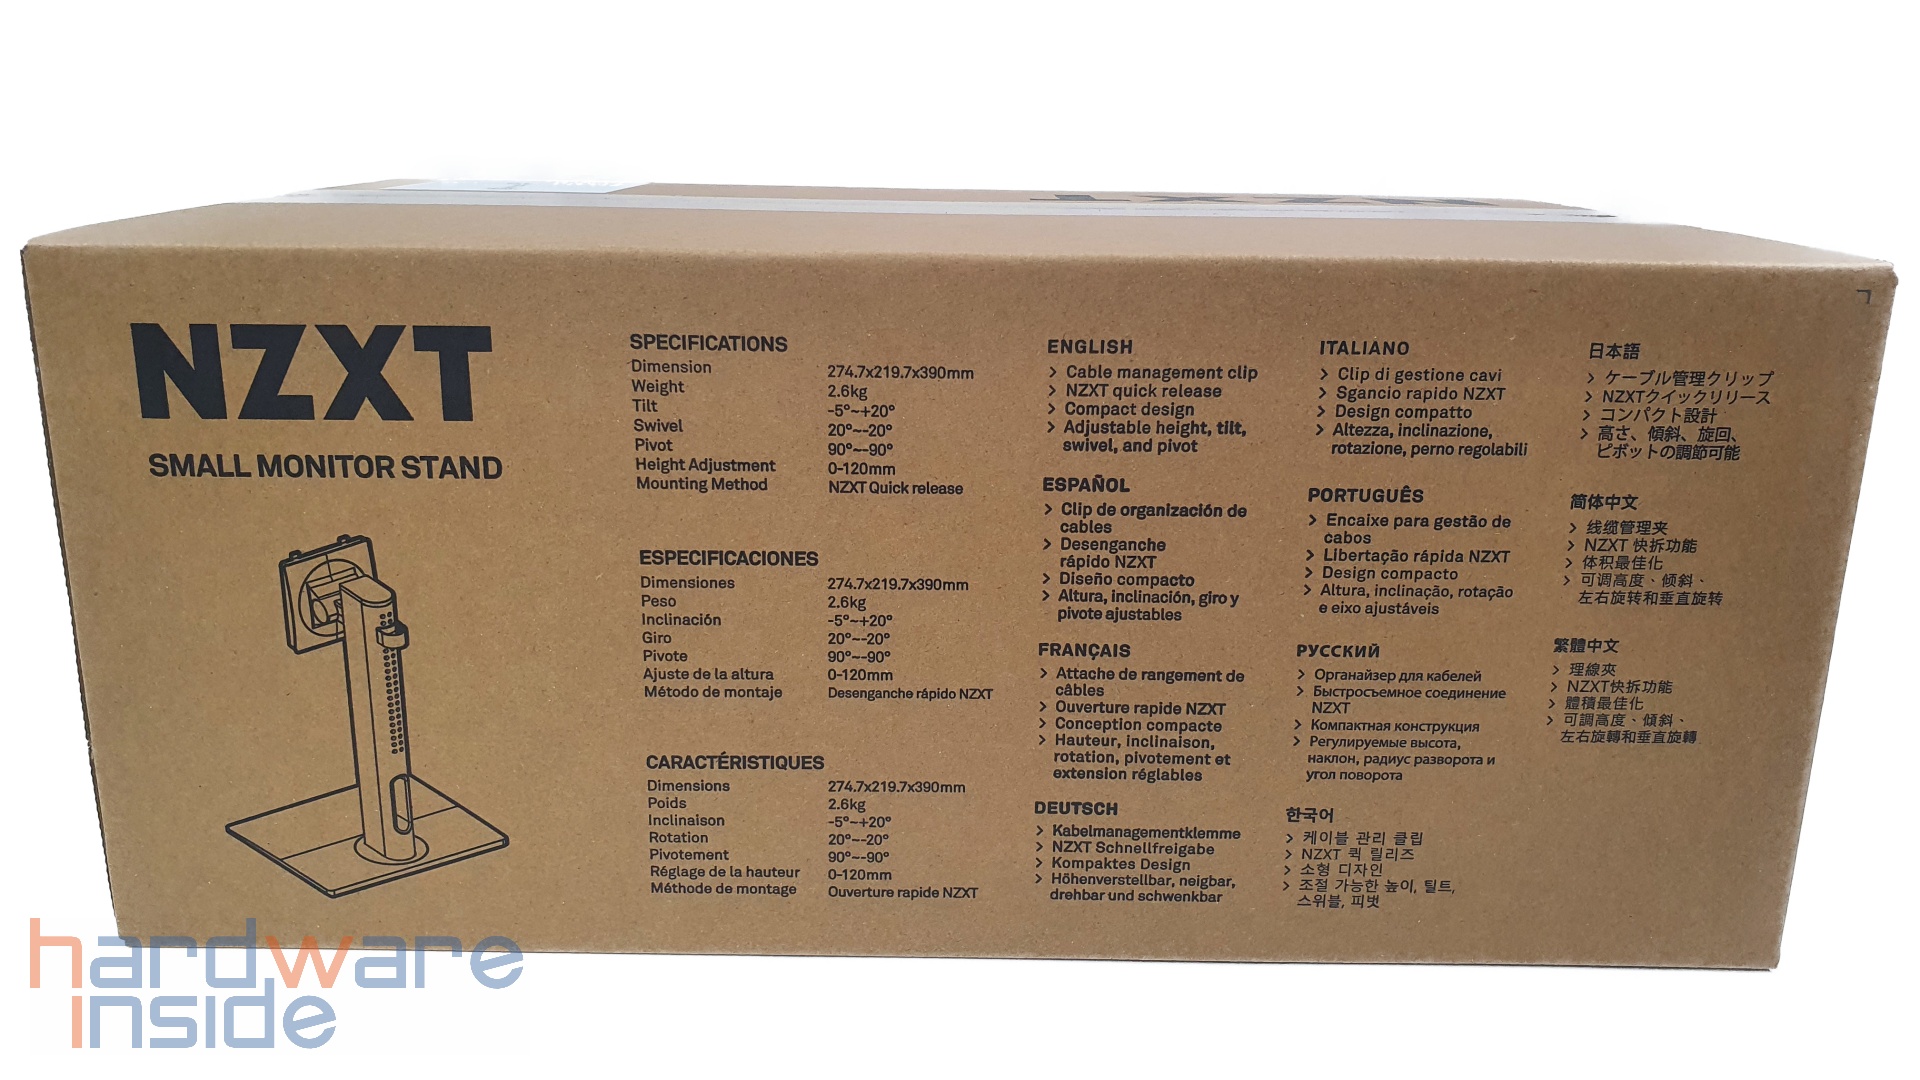 nzxt-canvas-27q-small-monitor-stand-verpackung-back.jpg